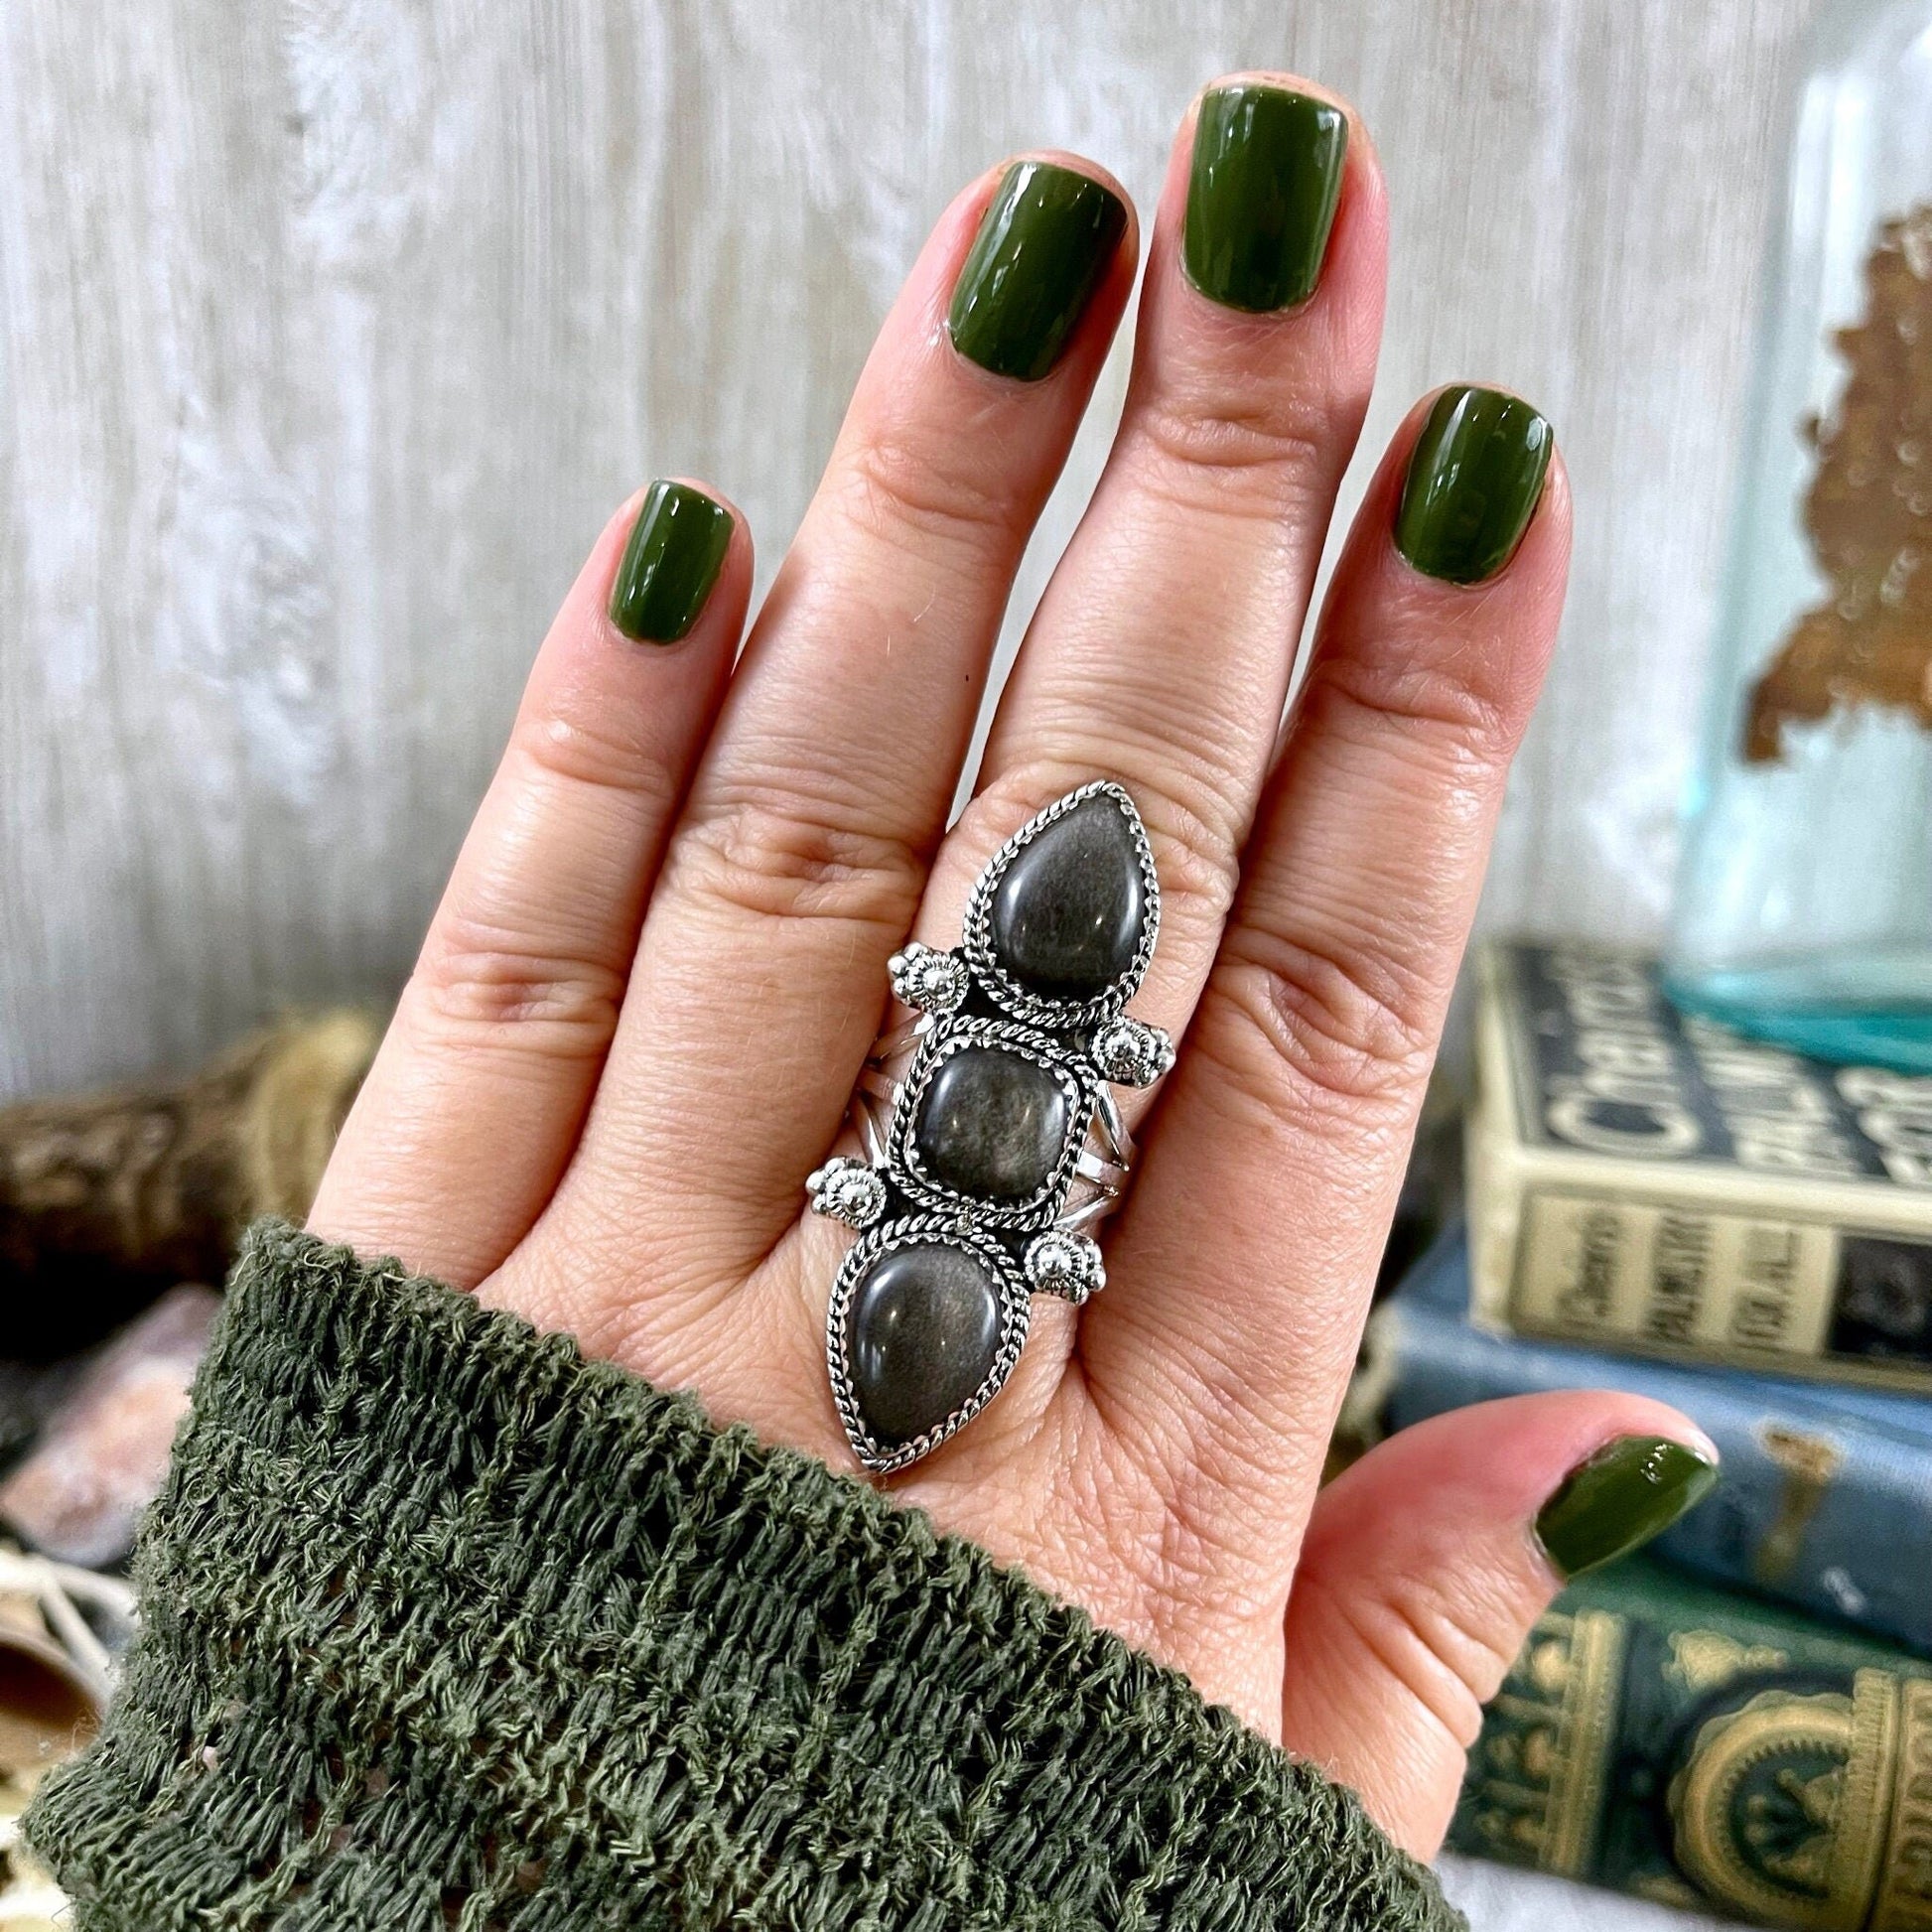 3 Stone Ring, Big Stone Ring, Bohemian Ring, Boho Jewelry, Boho Ring, Crystal Ring, Etsy Id 1078477541, Festival Jewelry, Foxlark Alchemy, Foxlark- Rings, Gift For Woman, Gypsy Ring, Jewelry, Rings, Statement Rings